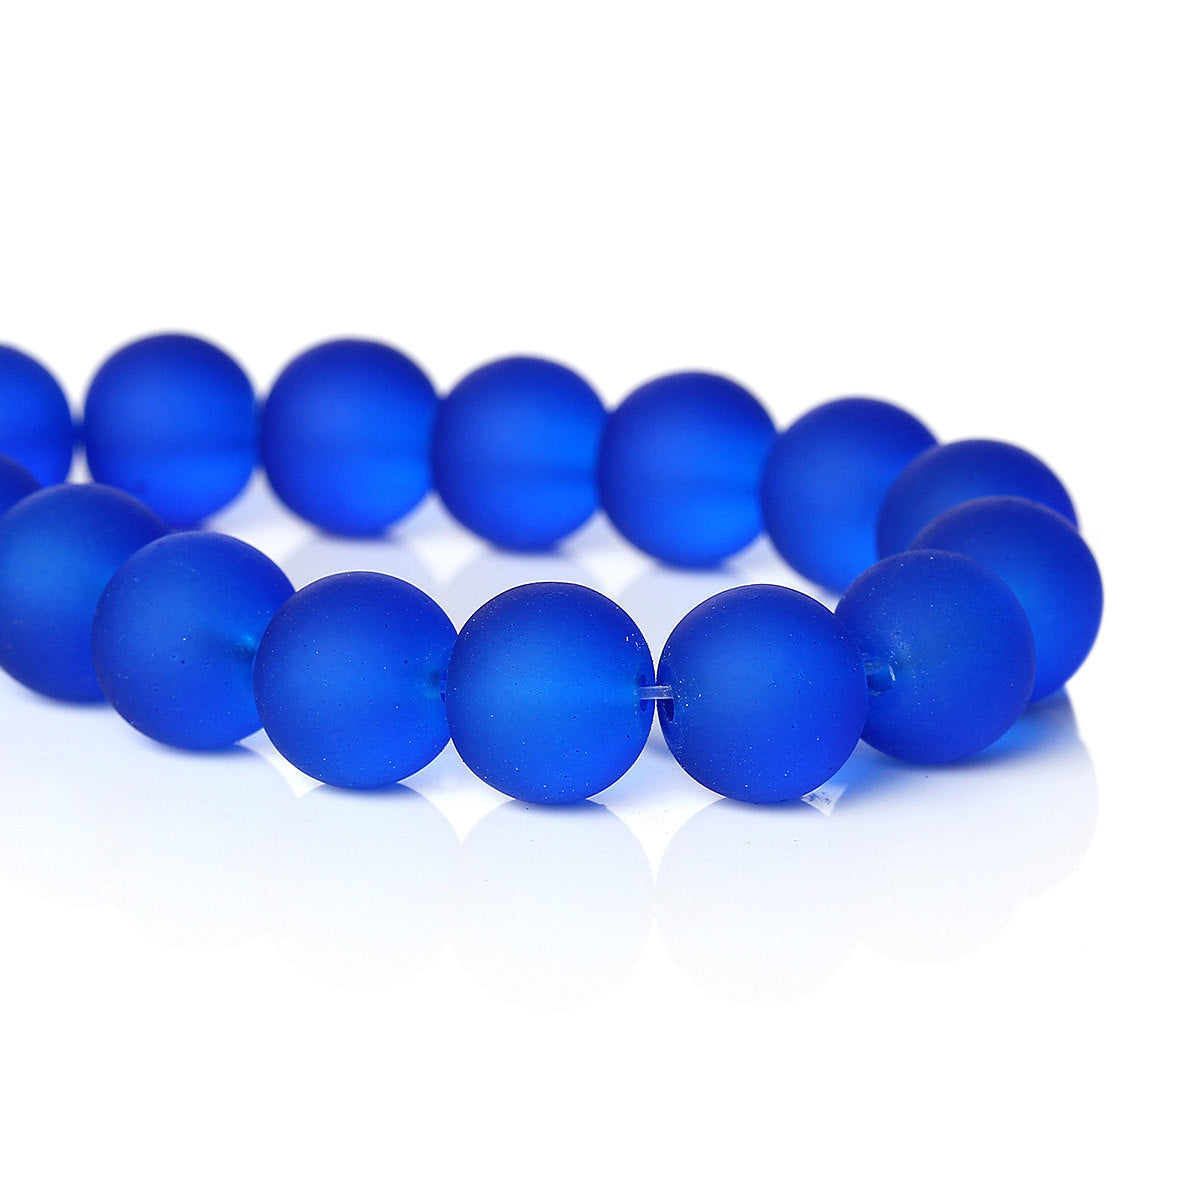 Round Glass Beads 11mm - Frosted Royal Blue - 1 Strand 86 Beads - BD67